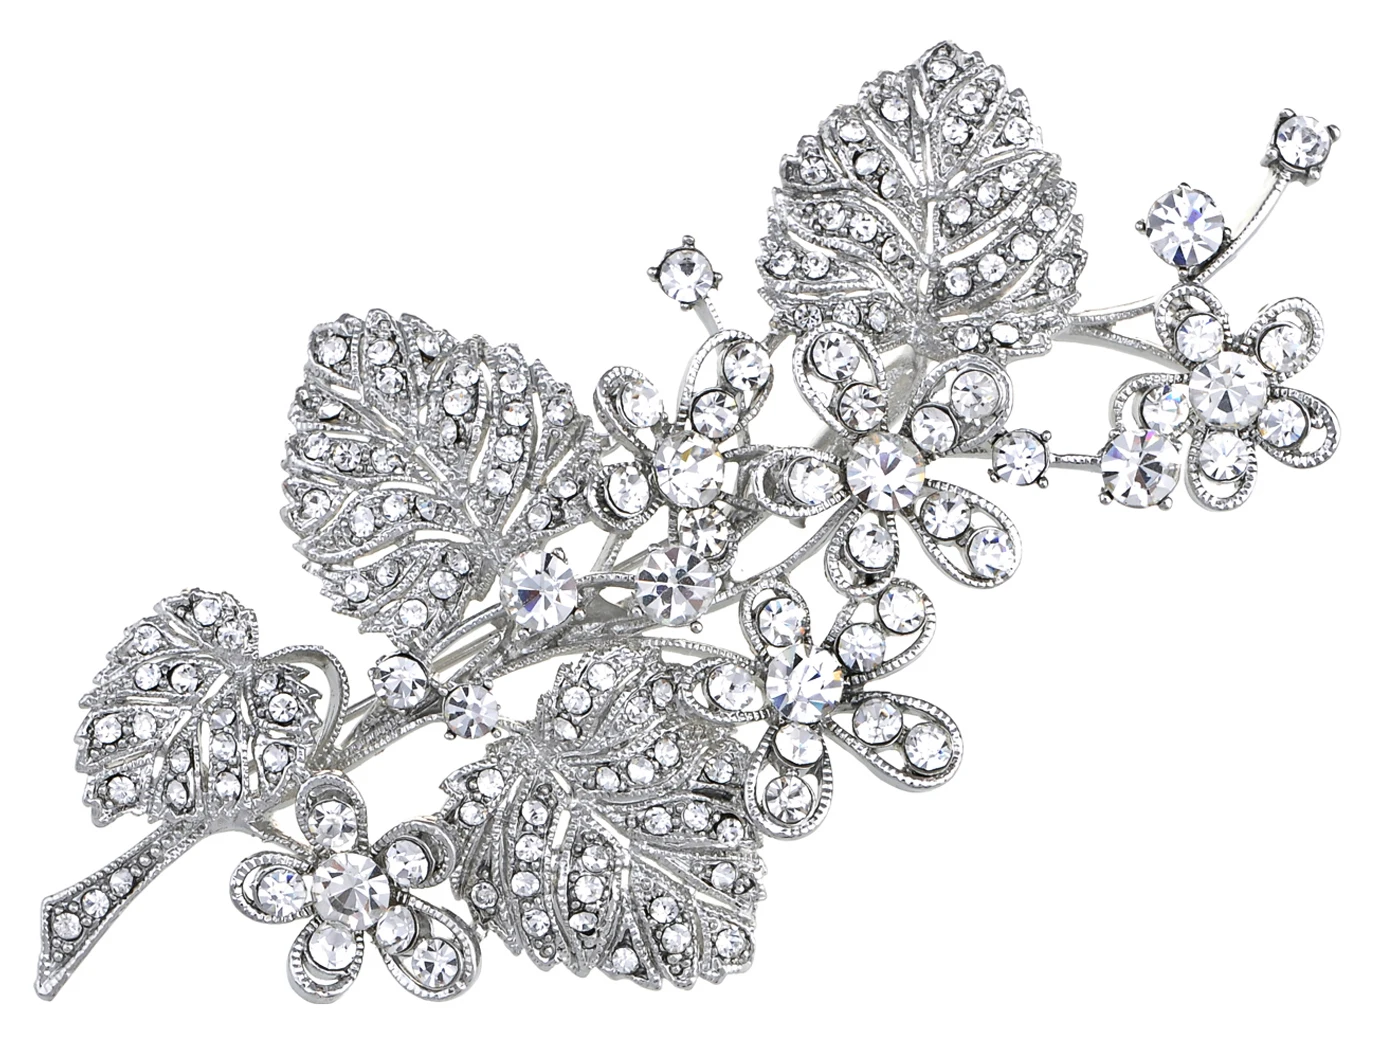 

Silvery Tone Sparkly Clear Crystal Rhinestones Flower Floral Leaves Bouquet Brooch Pin